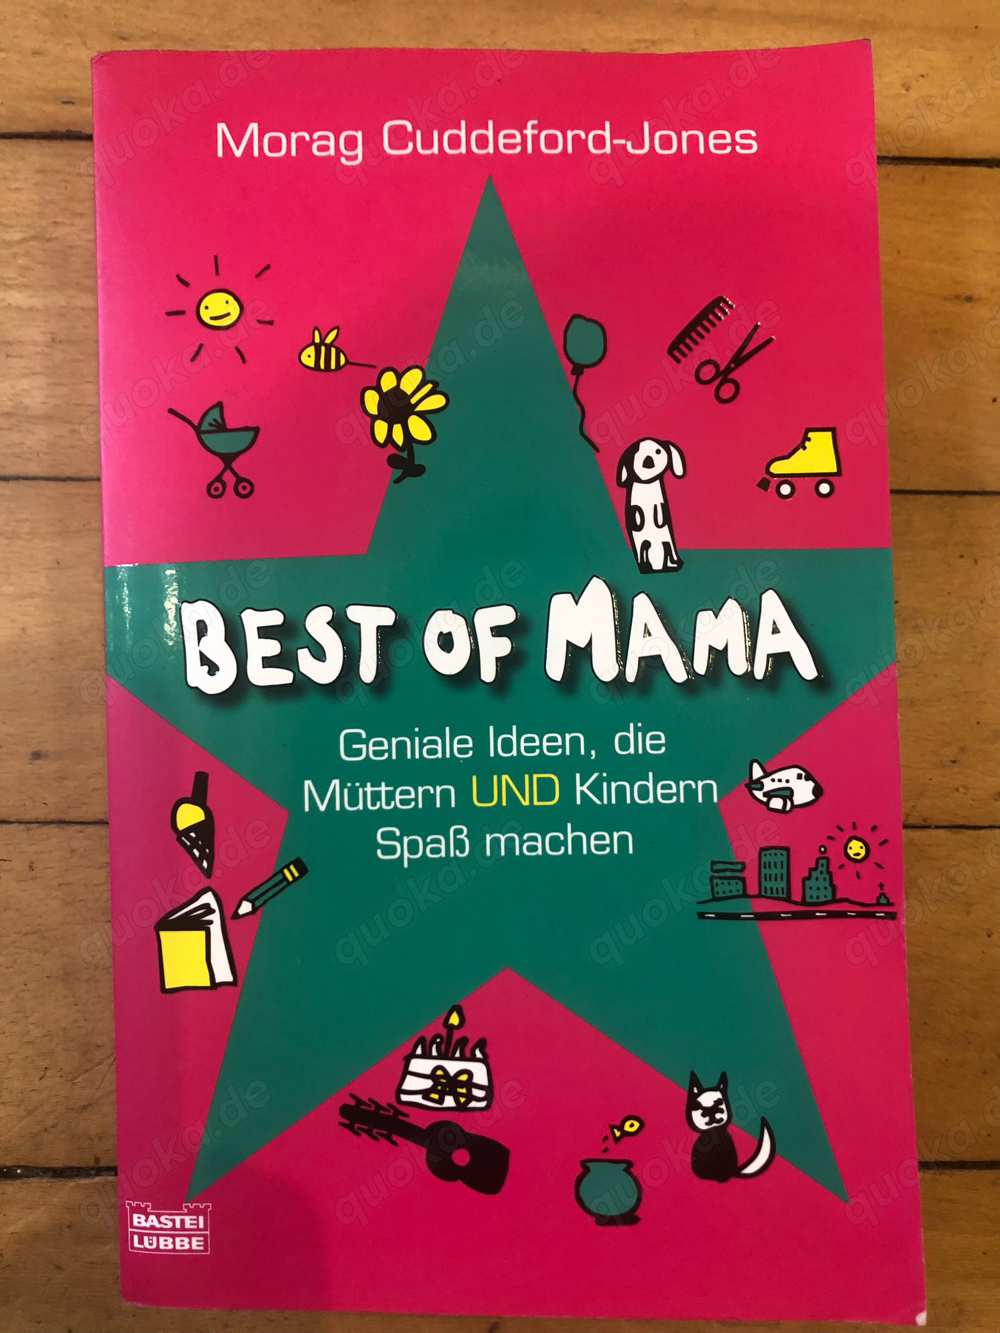 Buch "Best of Mama"